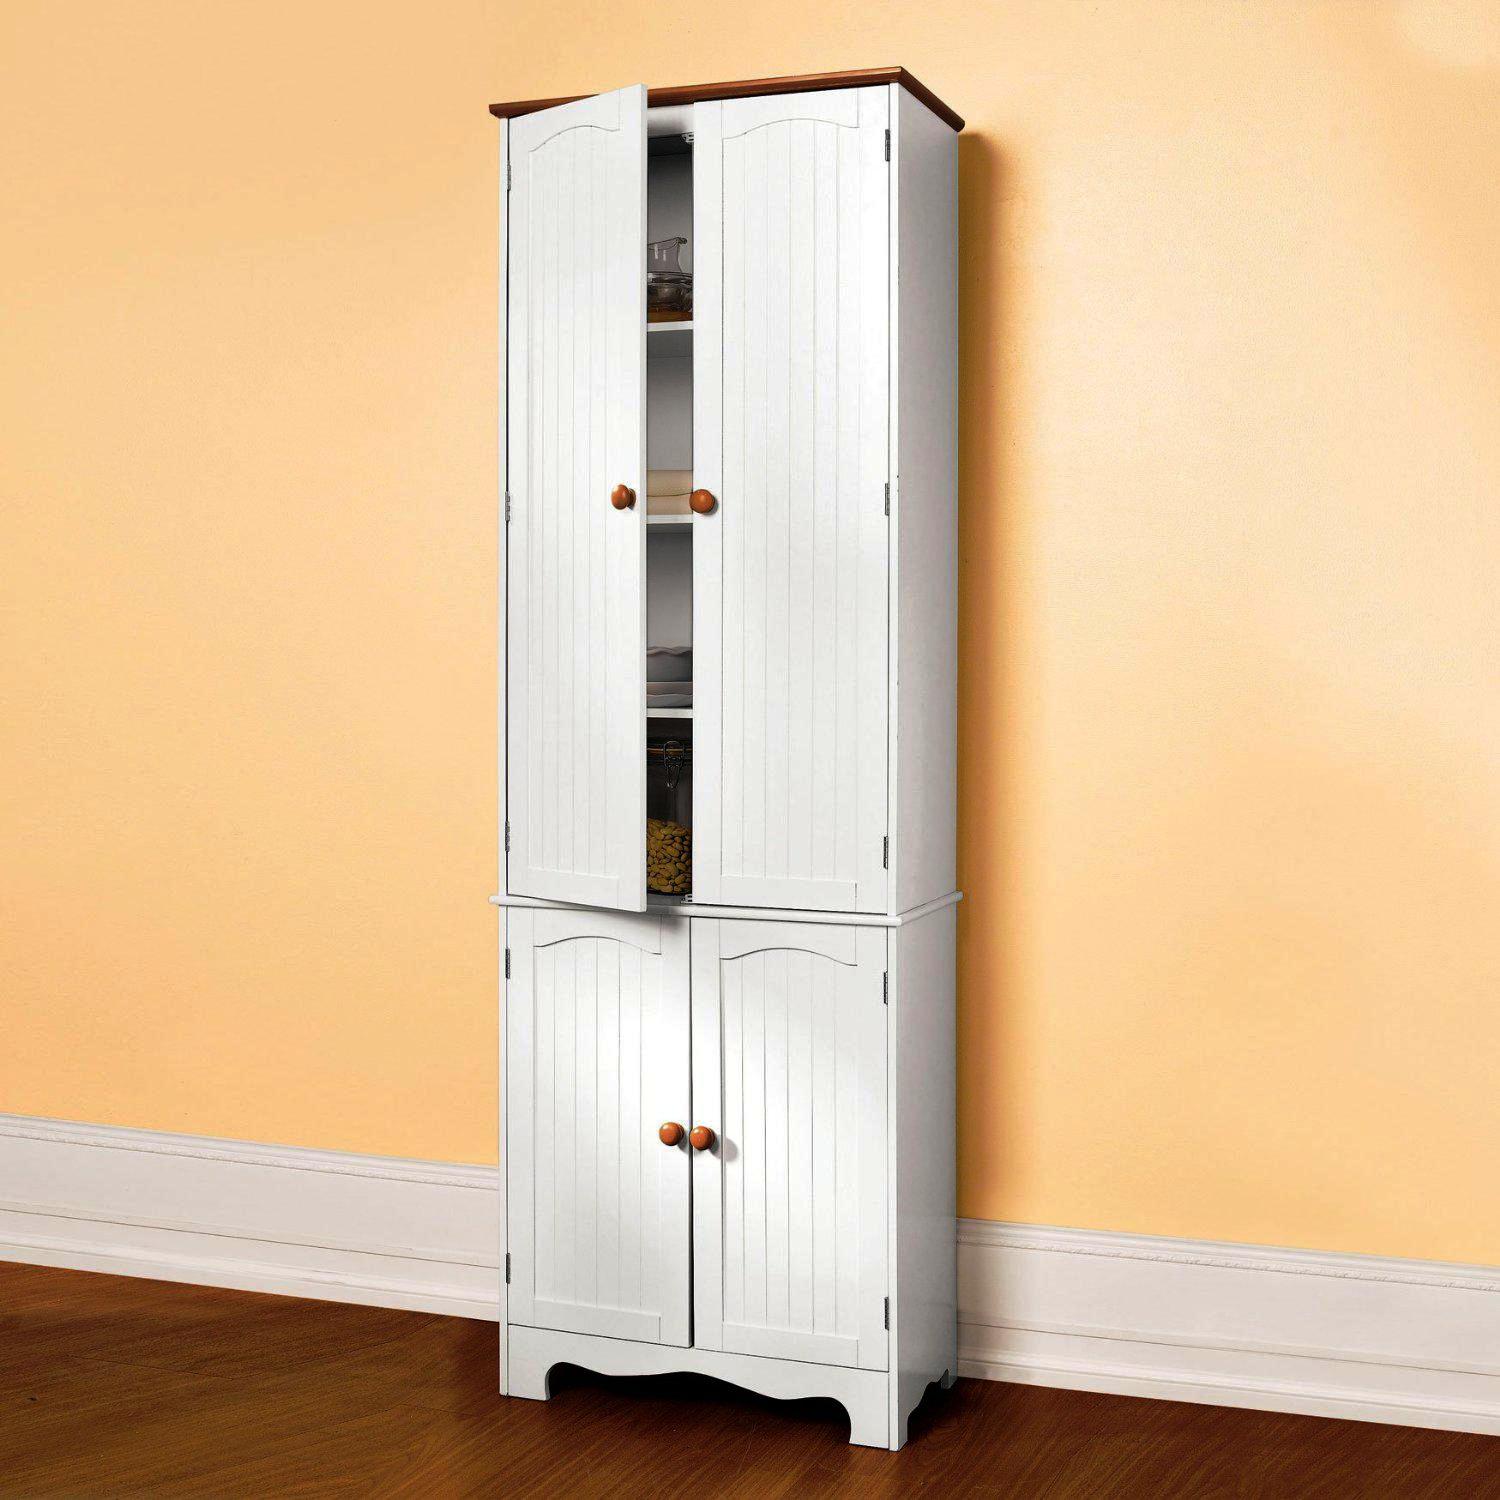 Freestanding Pantry Cabinet Lowes